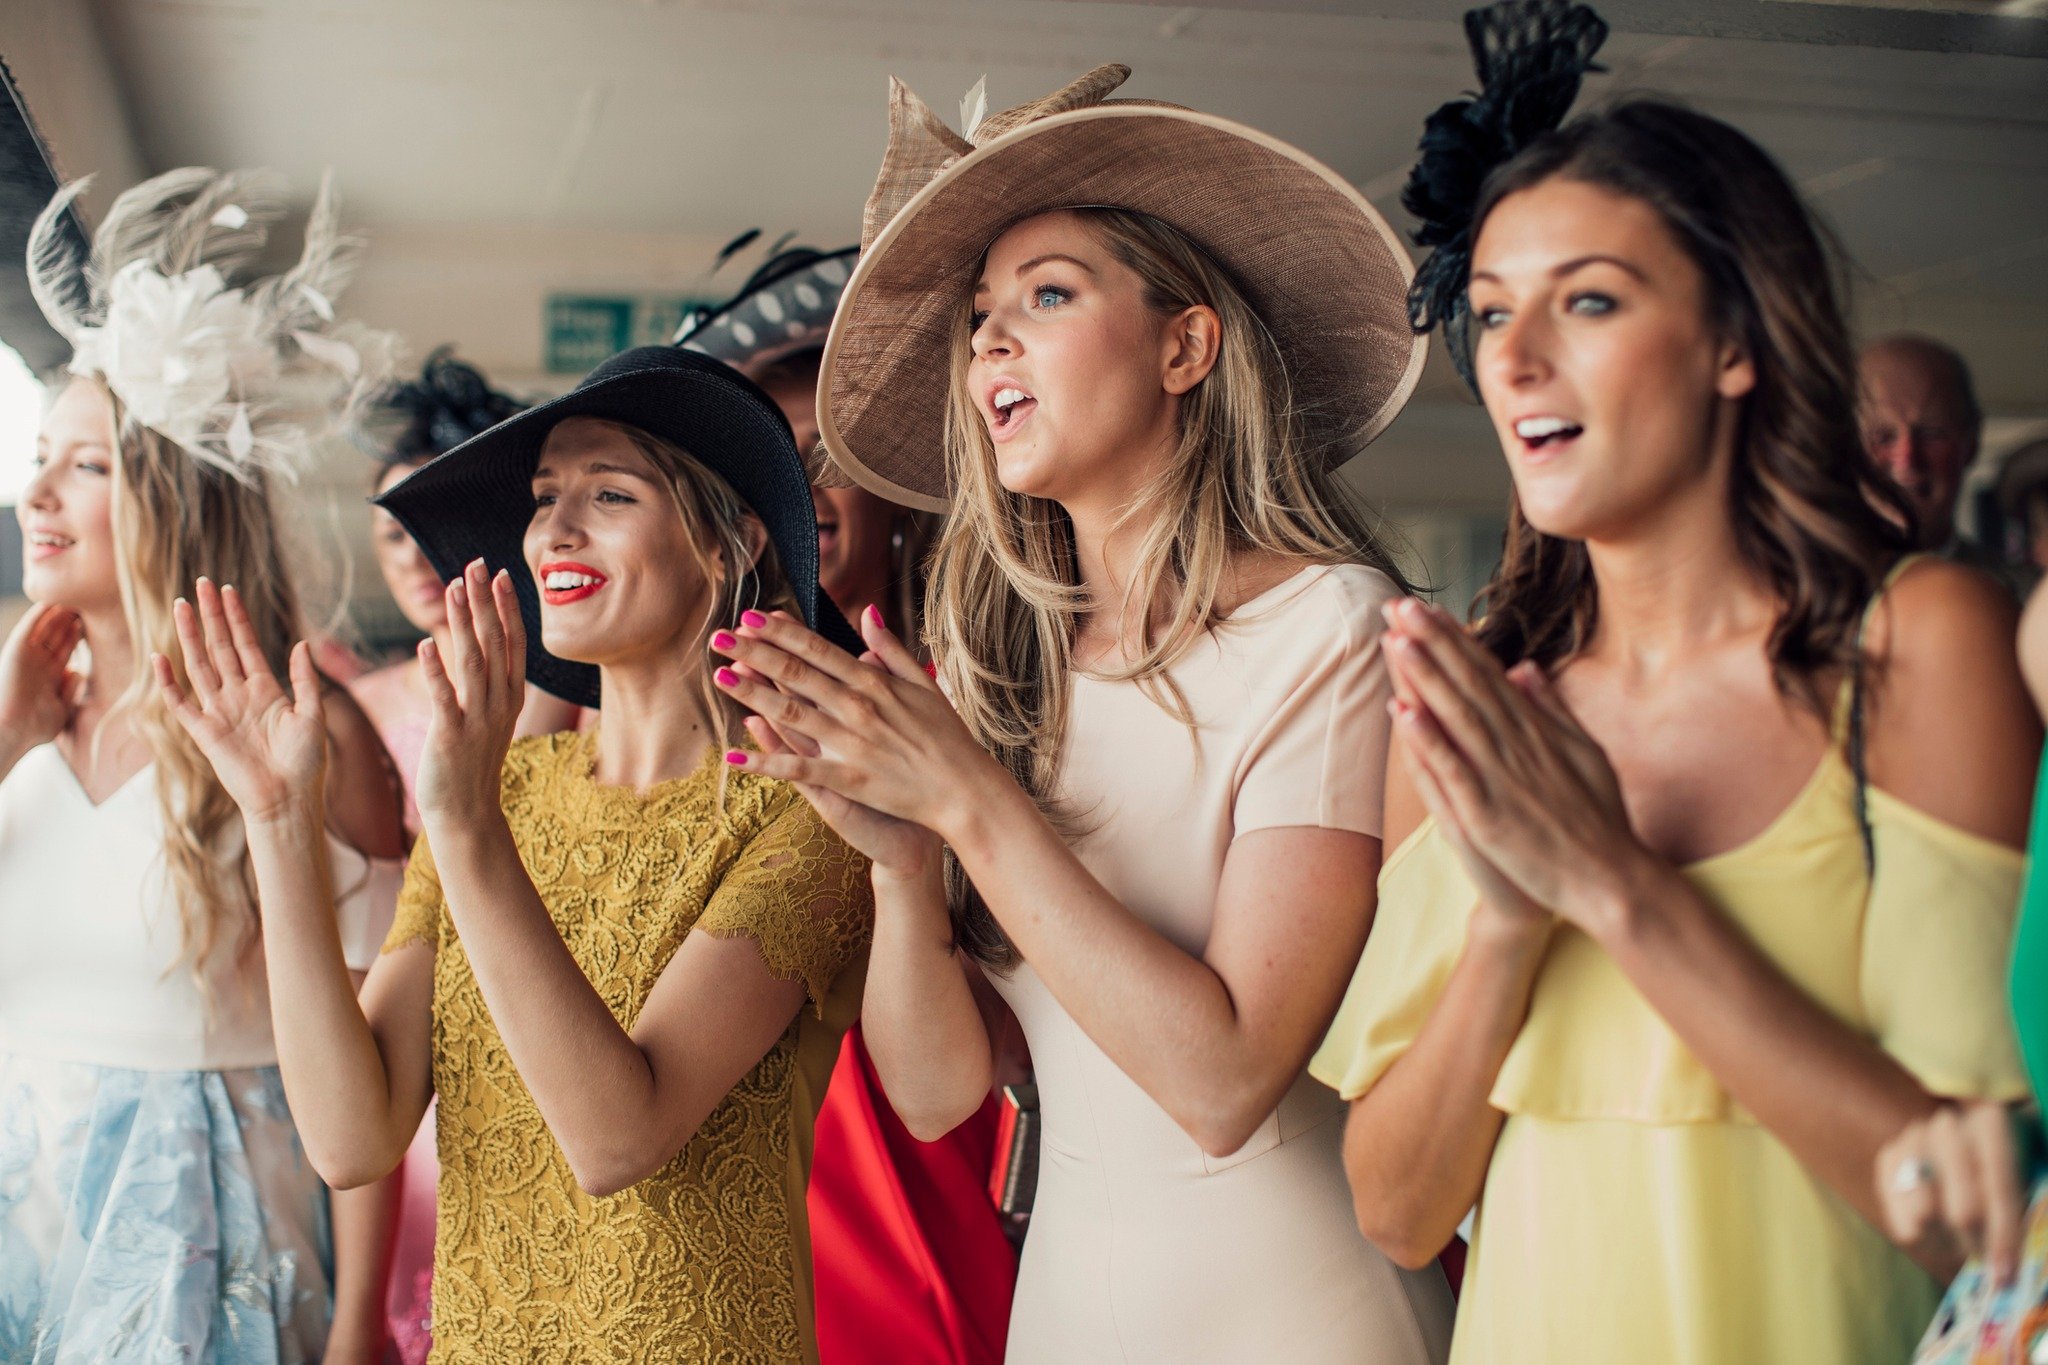 Gear up for Derby season with flair! Come join us in the Grand Ballroom this Saturday, May 4th, for an evening of exclusive cocktails, exquisite cuisine, and live DJ entertainment. Plus, don't miss your chance to win fantastic prizes in our special g